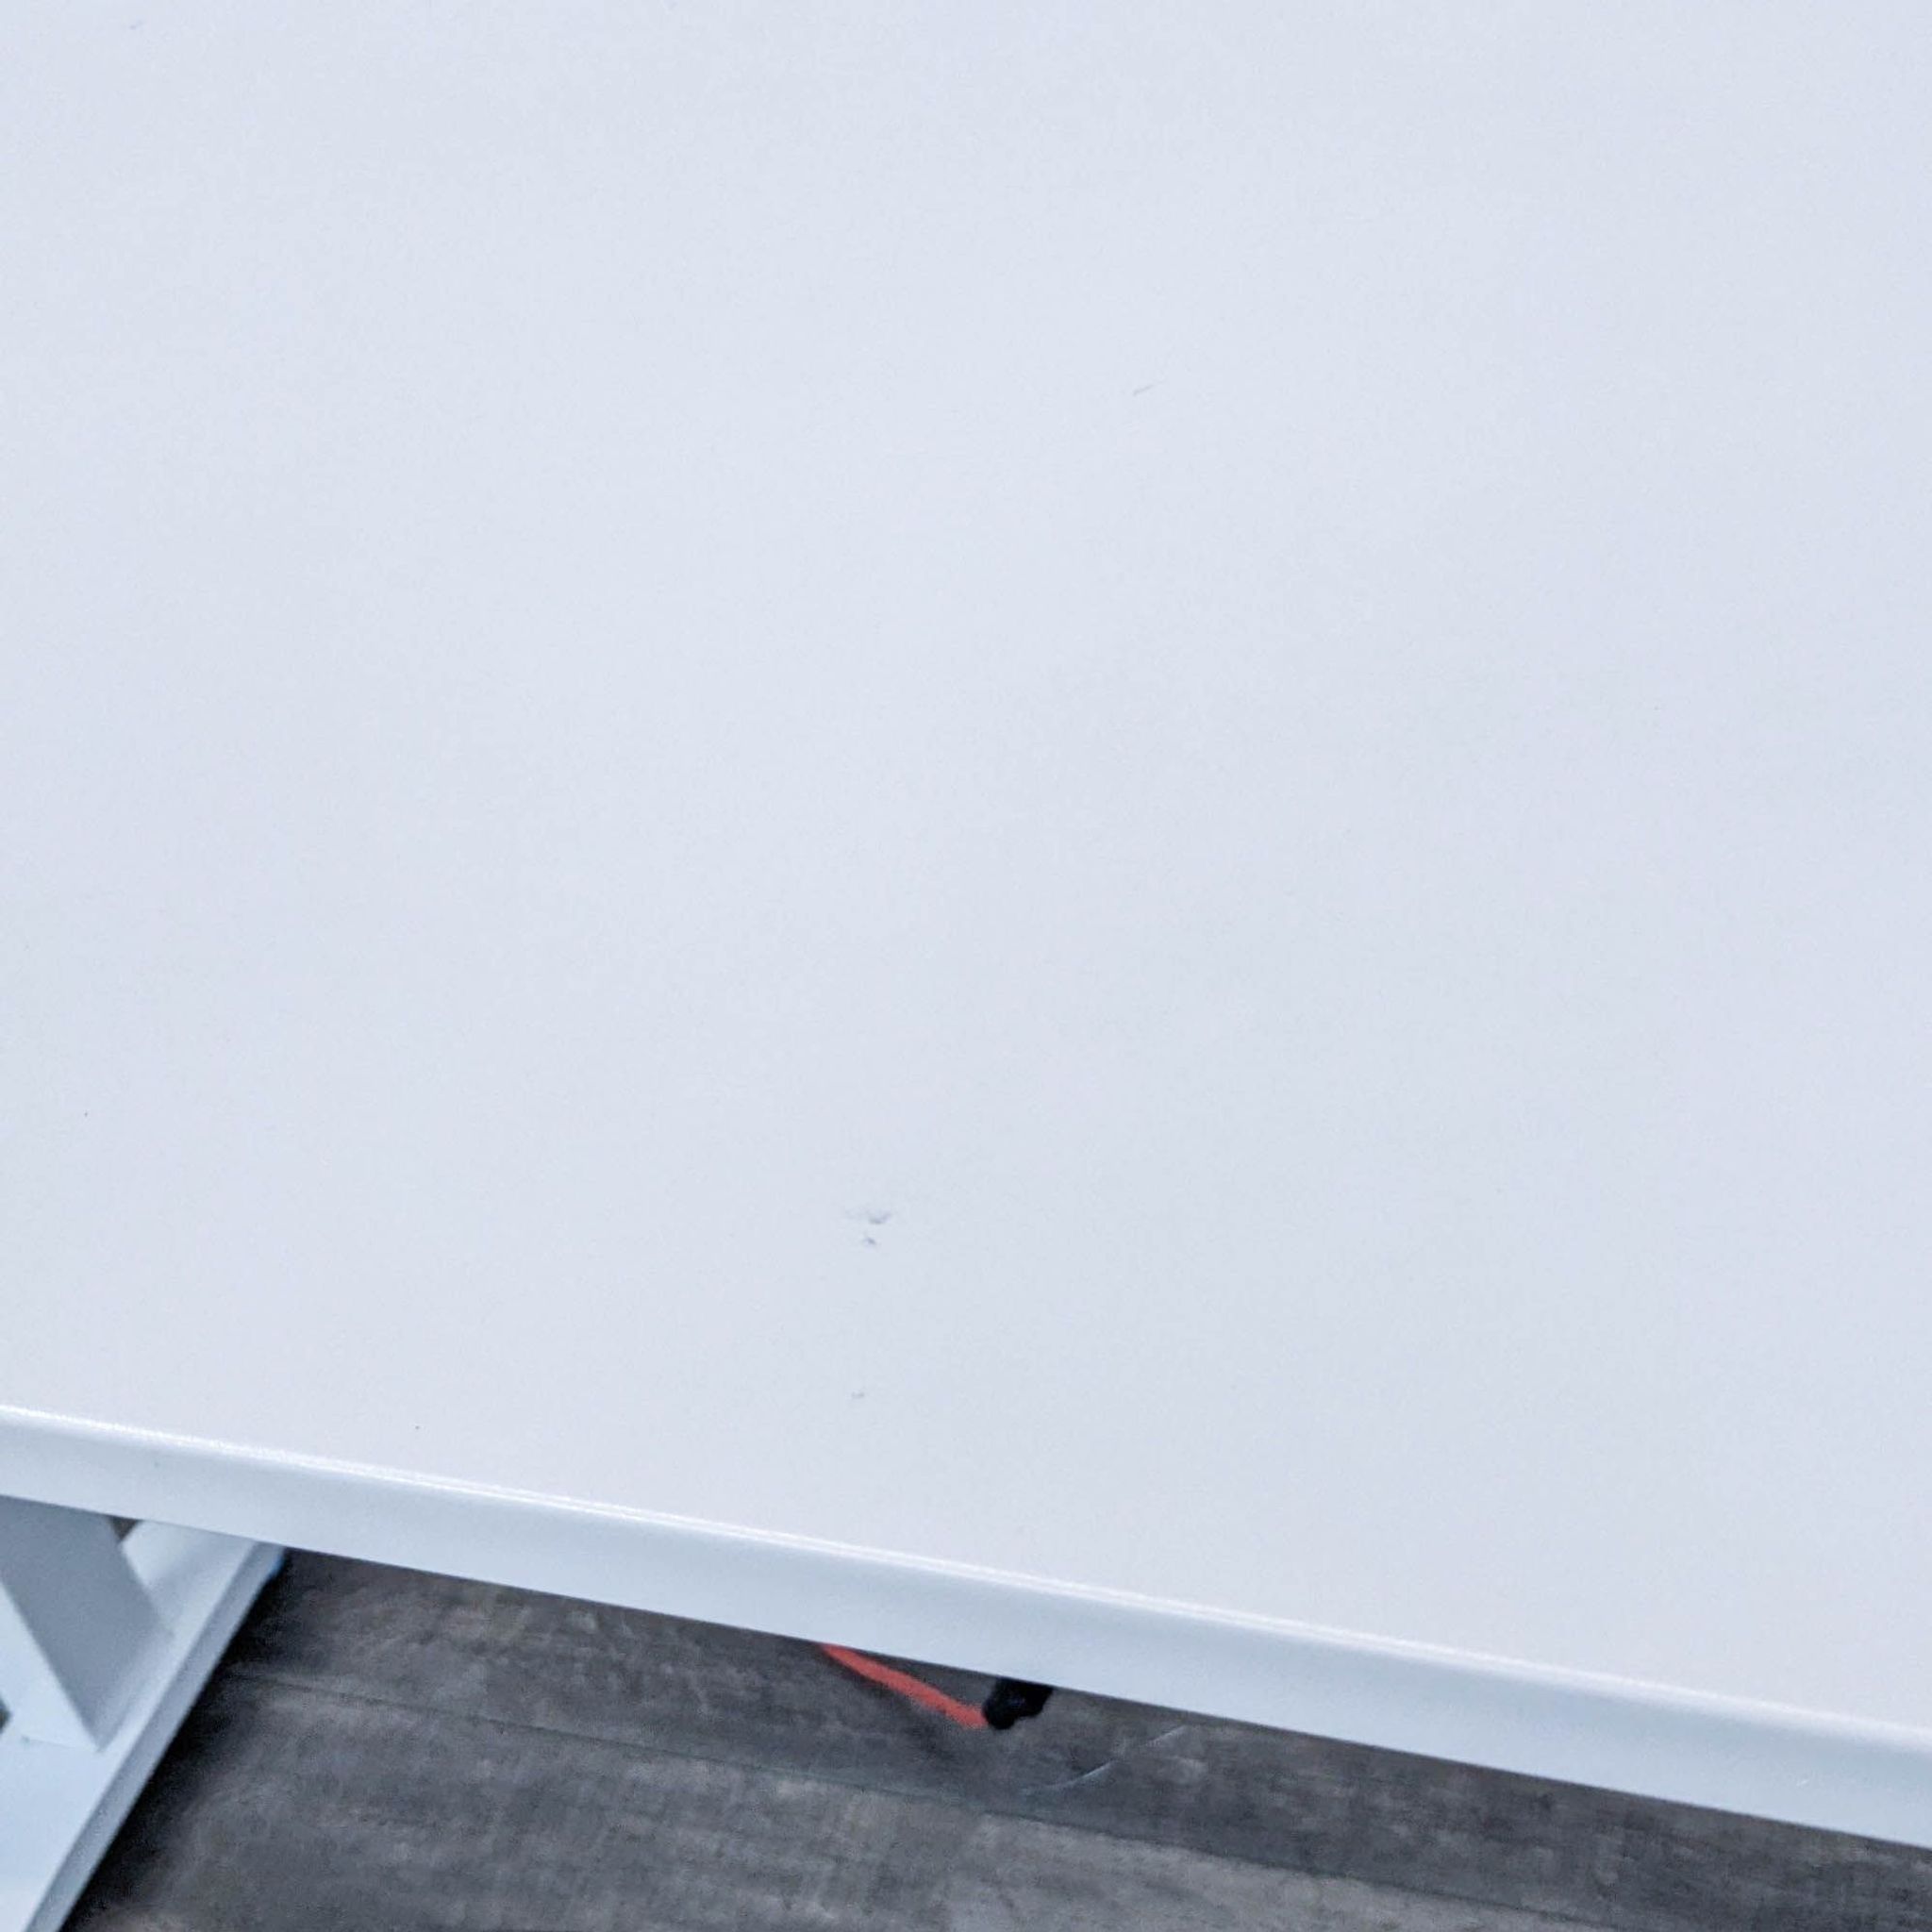 Top view of a Reperch white motorized adjustable-height desk, focusing on the tabletop and part of the frame.